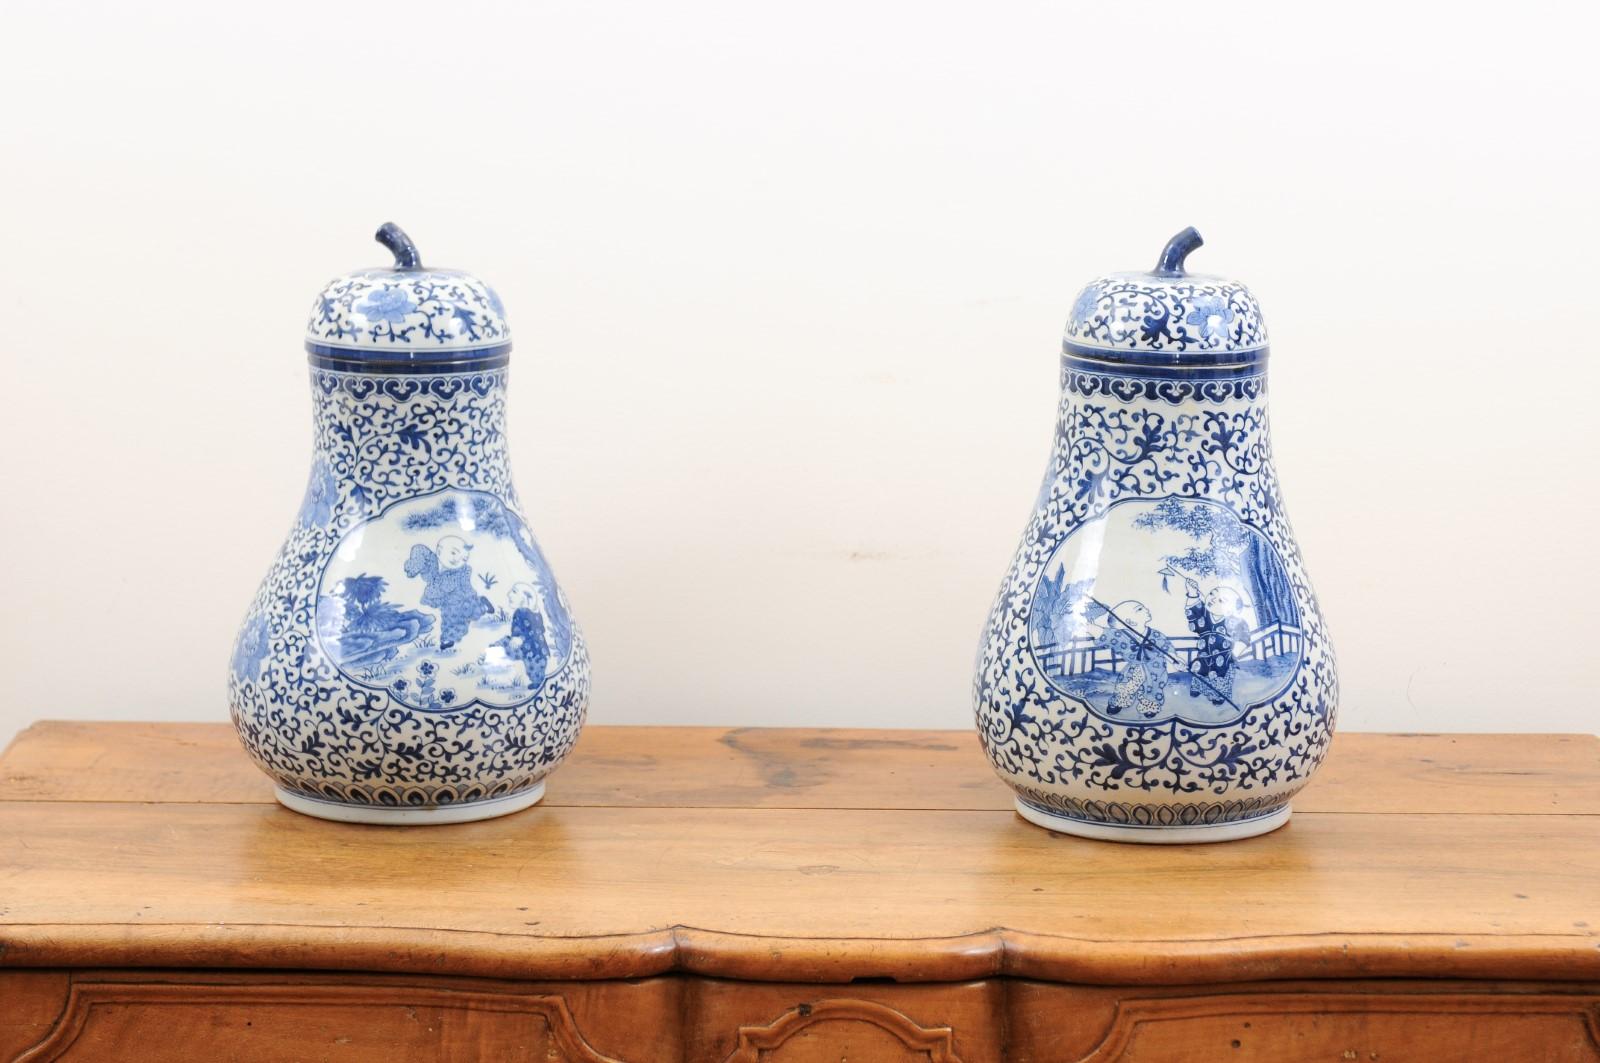 A pair of blue and white Chinese export porcelain vases from the early 20th century, with lids and Chinoiseries scenes. Created in China during the early years of the 20th century, each of this pair of pear-shaped blue and white porcelain vases